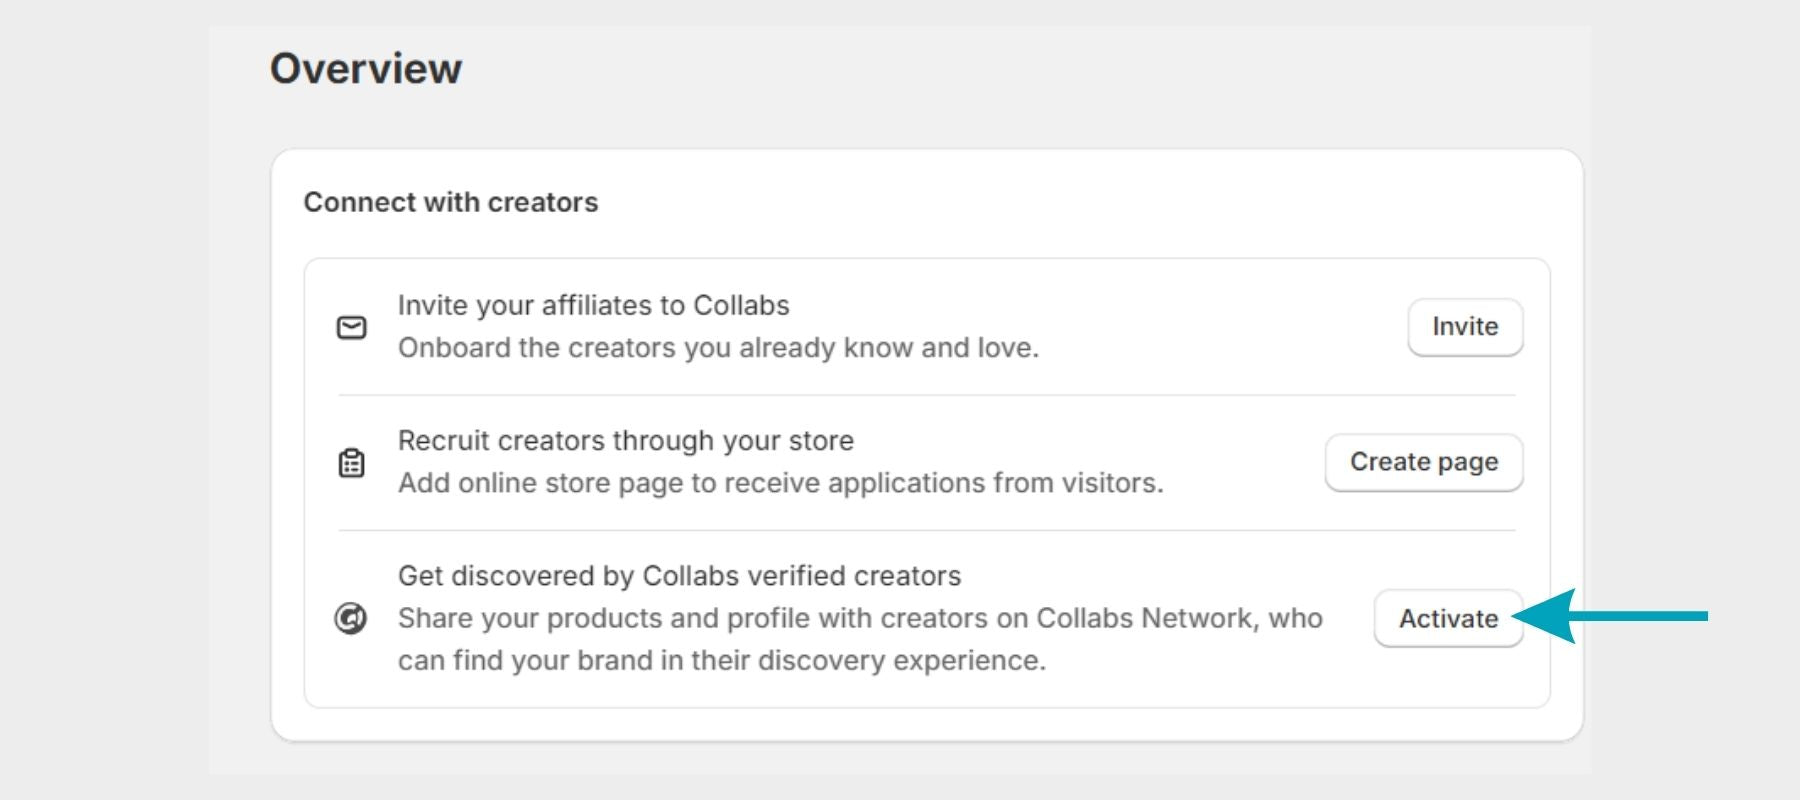 The way to select the get found by Collabs verified creators option.